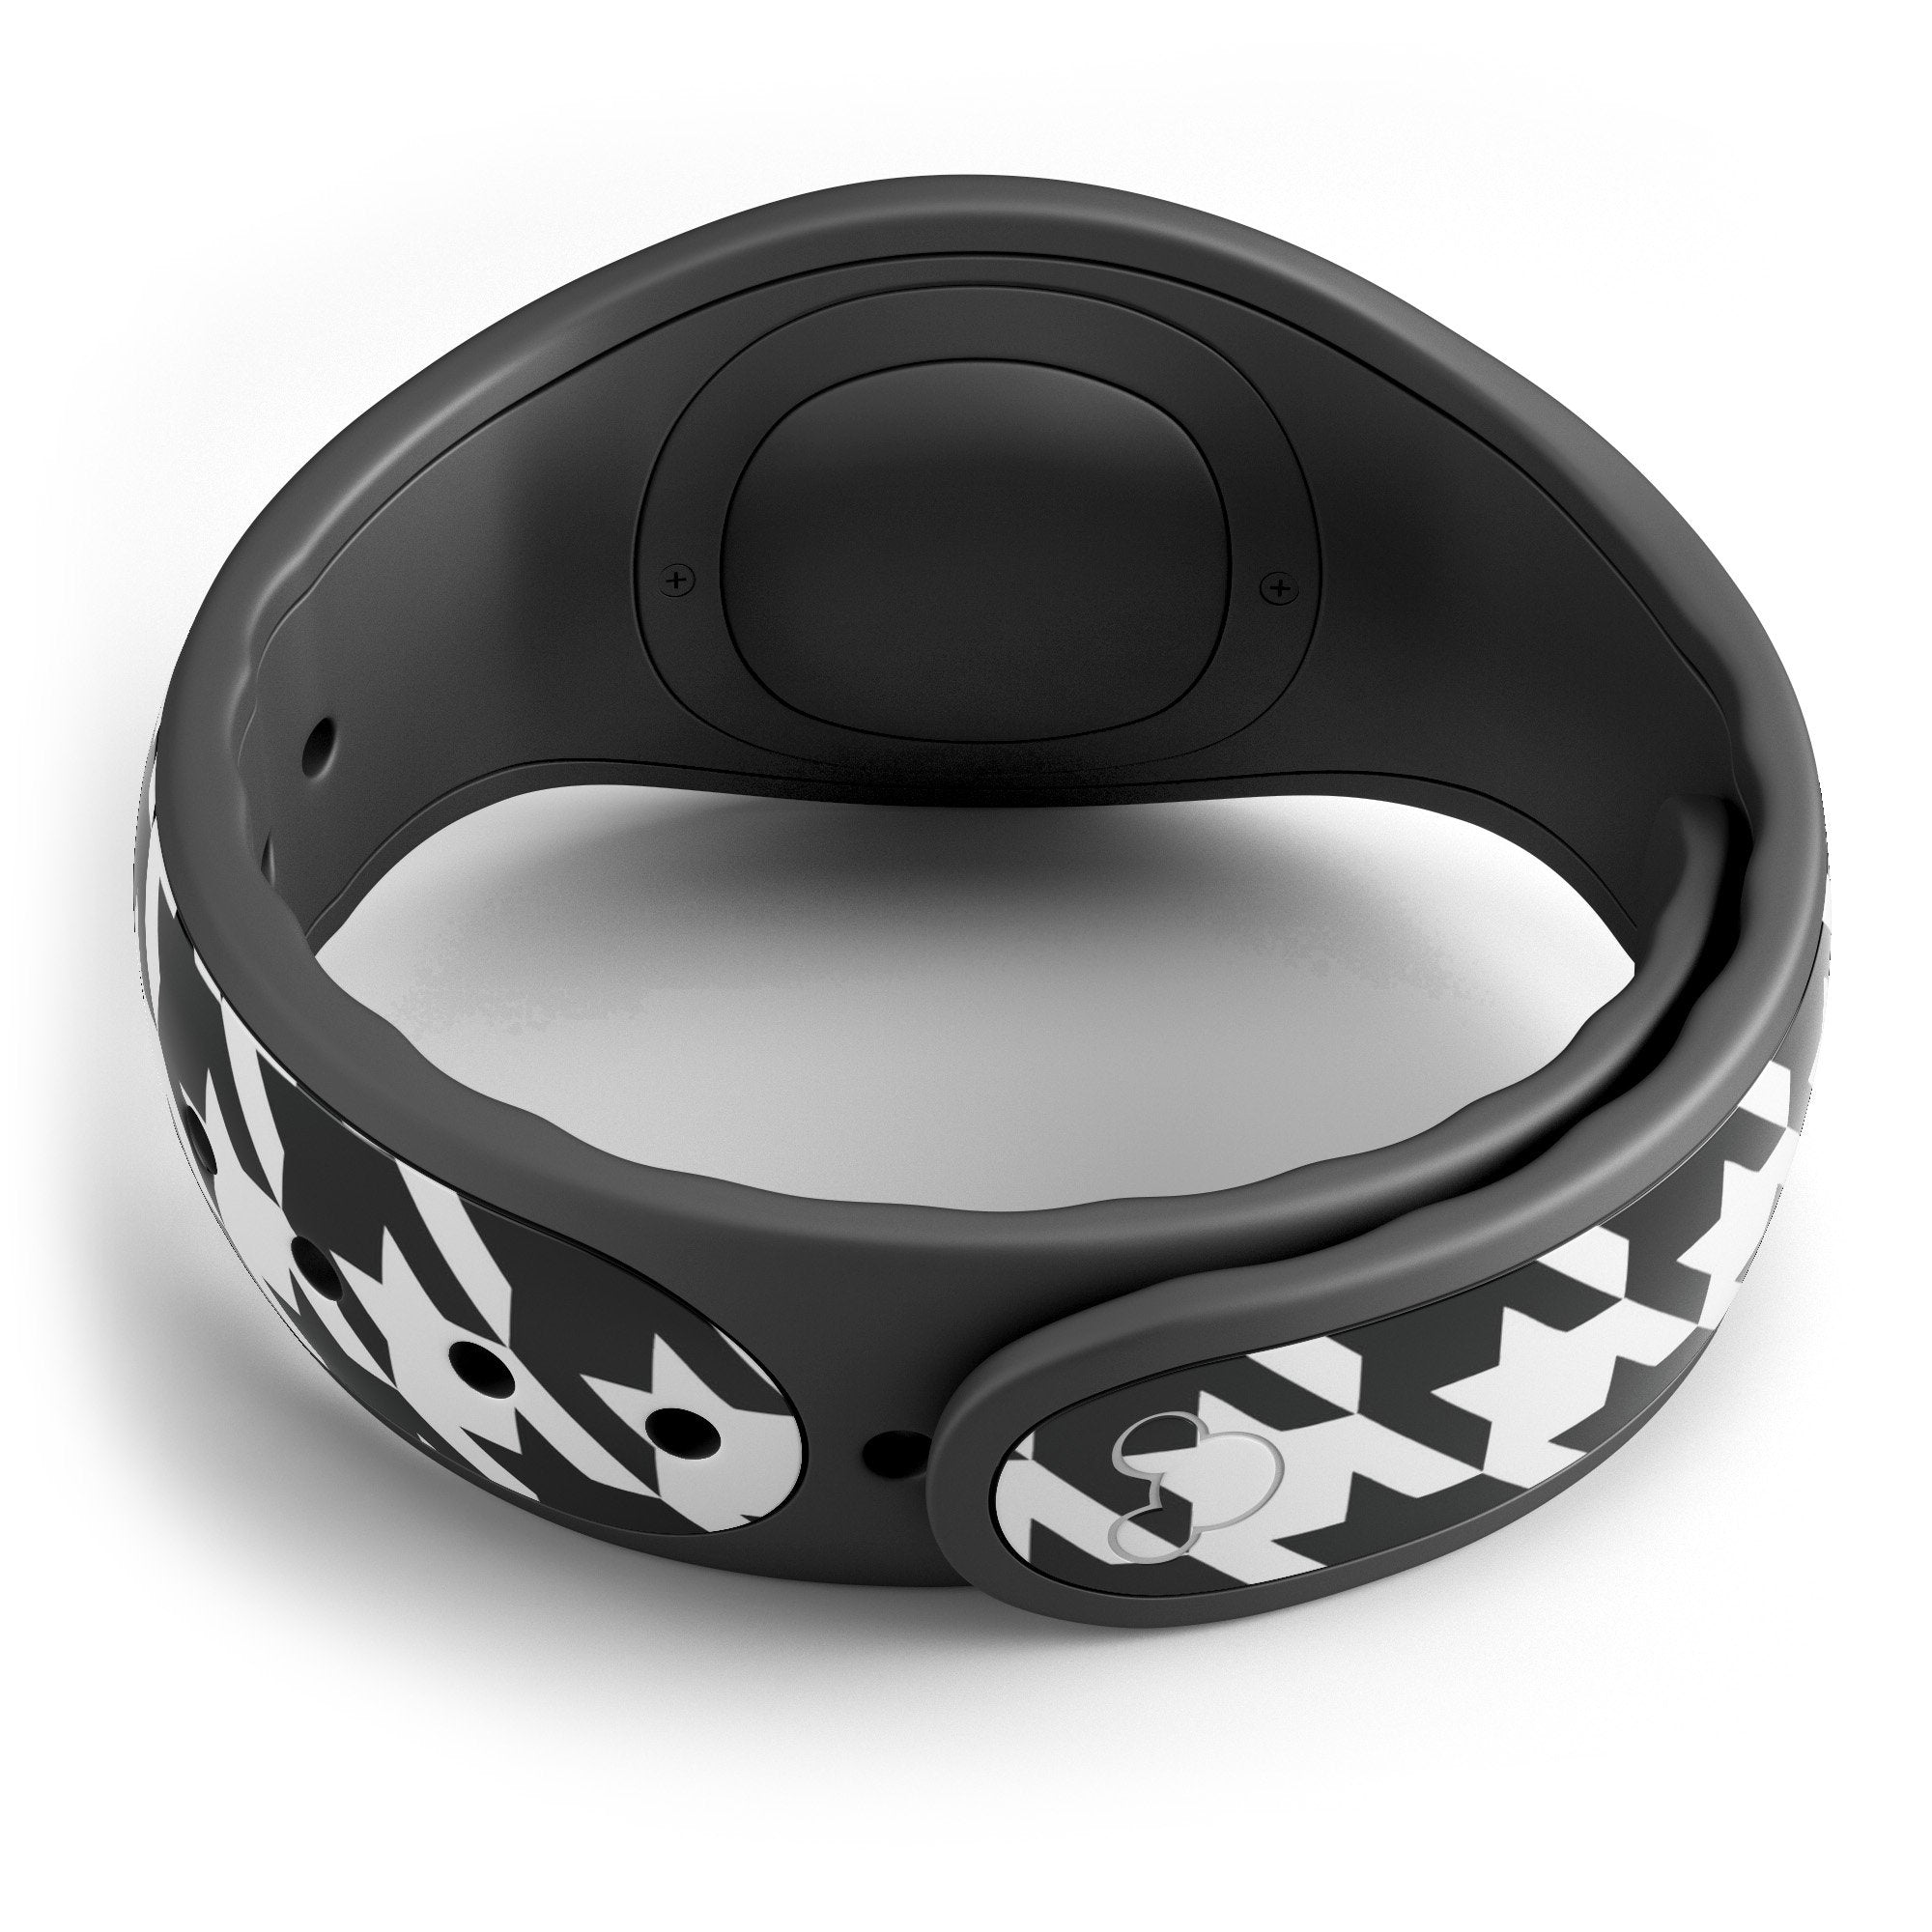 Black and White Houndstooth Pattern - Decal Skin Wrap Kit for the